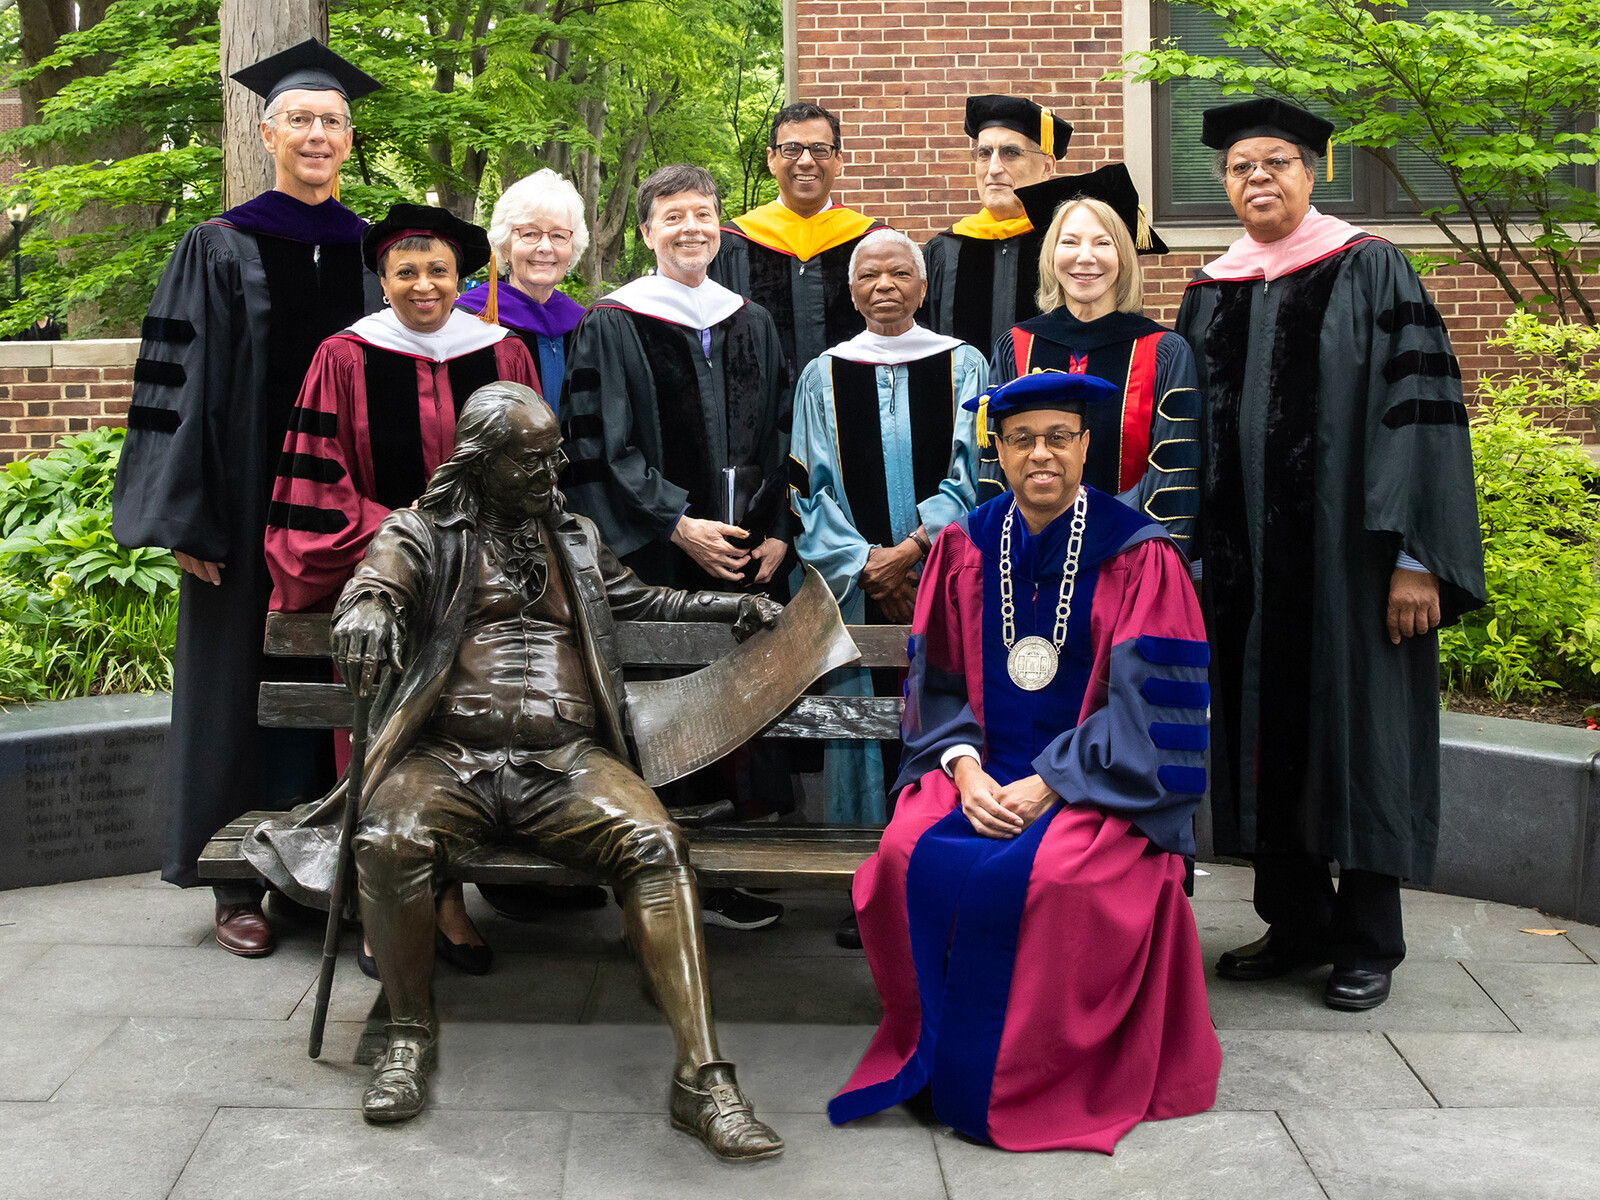 2022 Penn Commencement group of honorary degree recipients in regalia